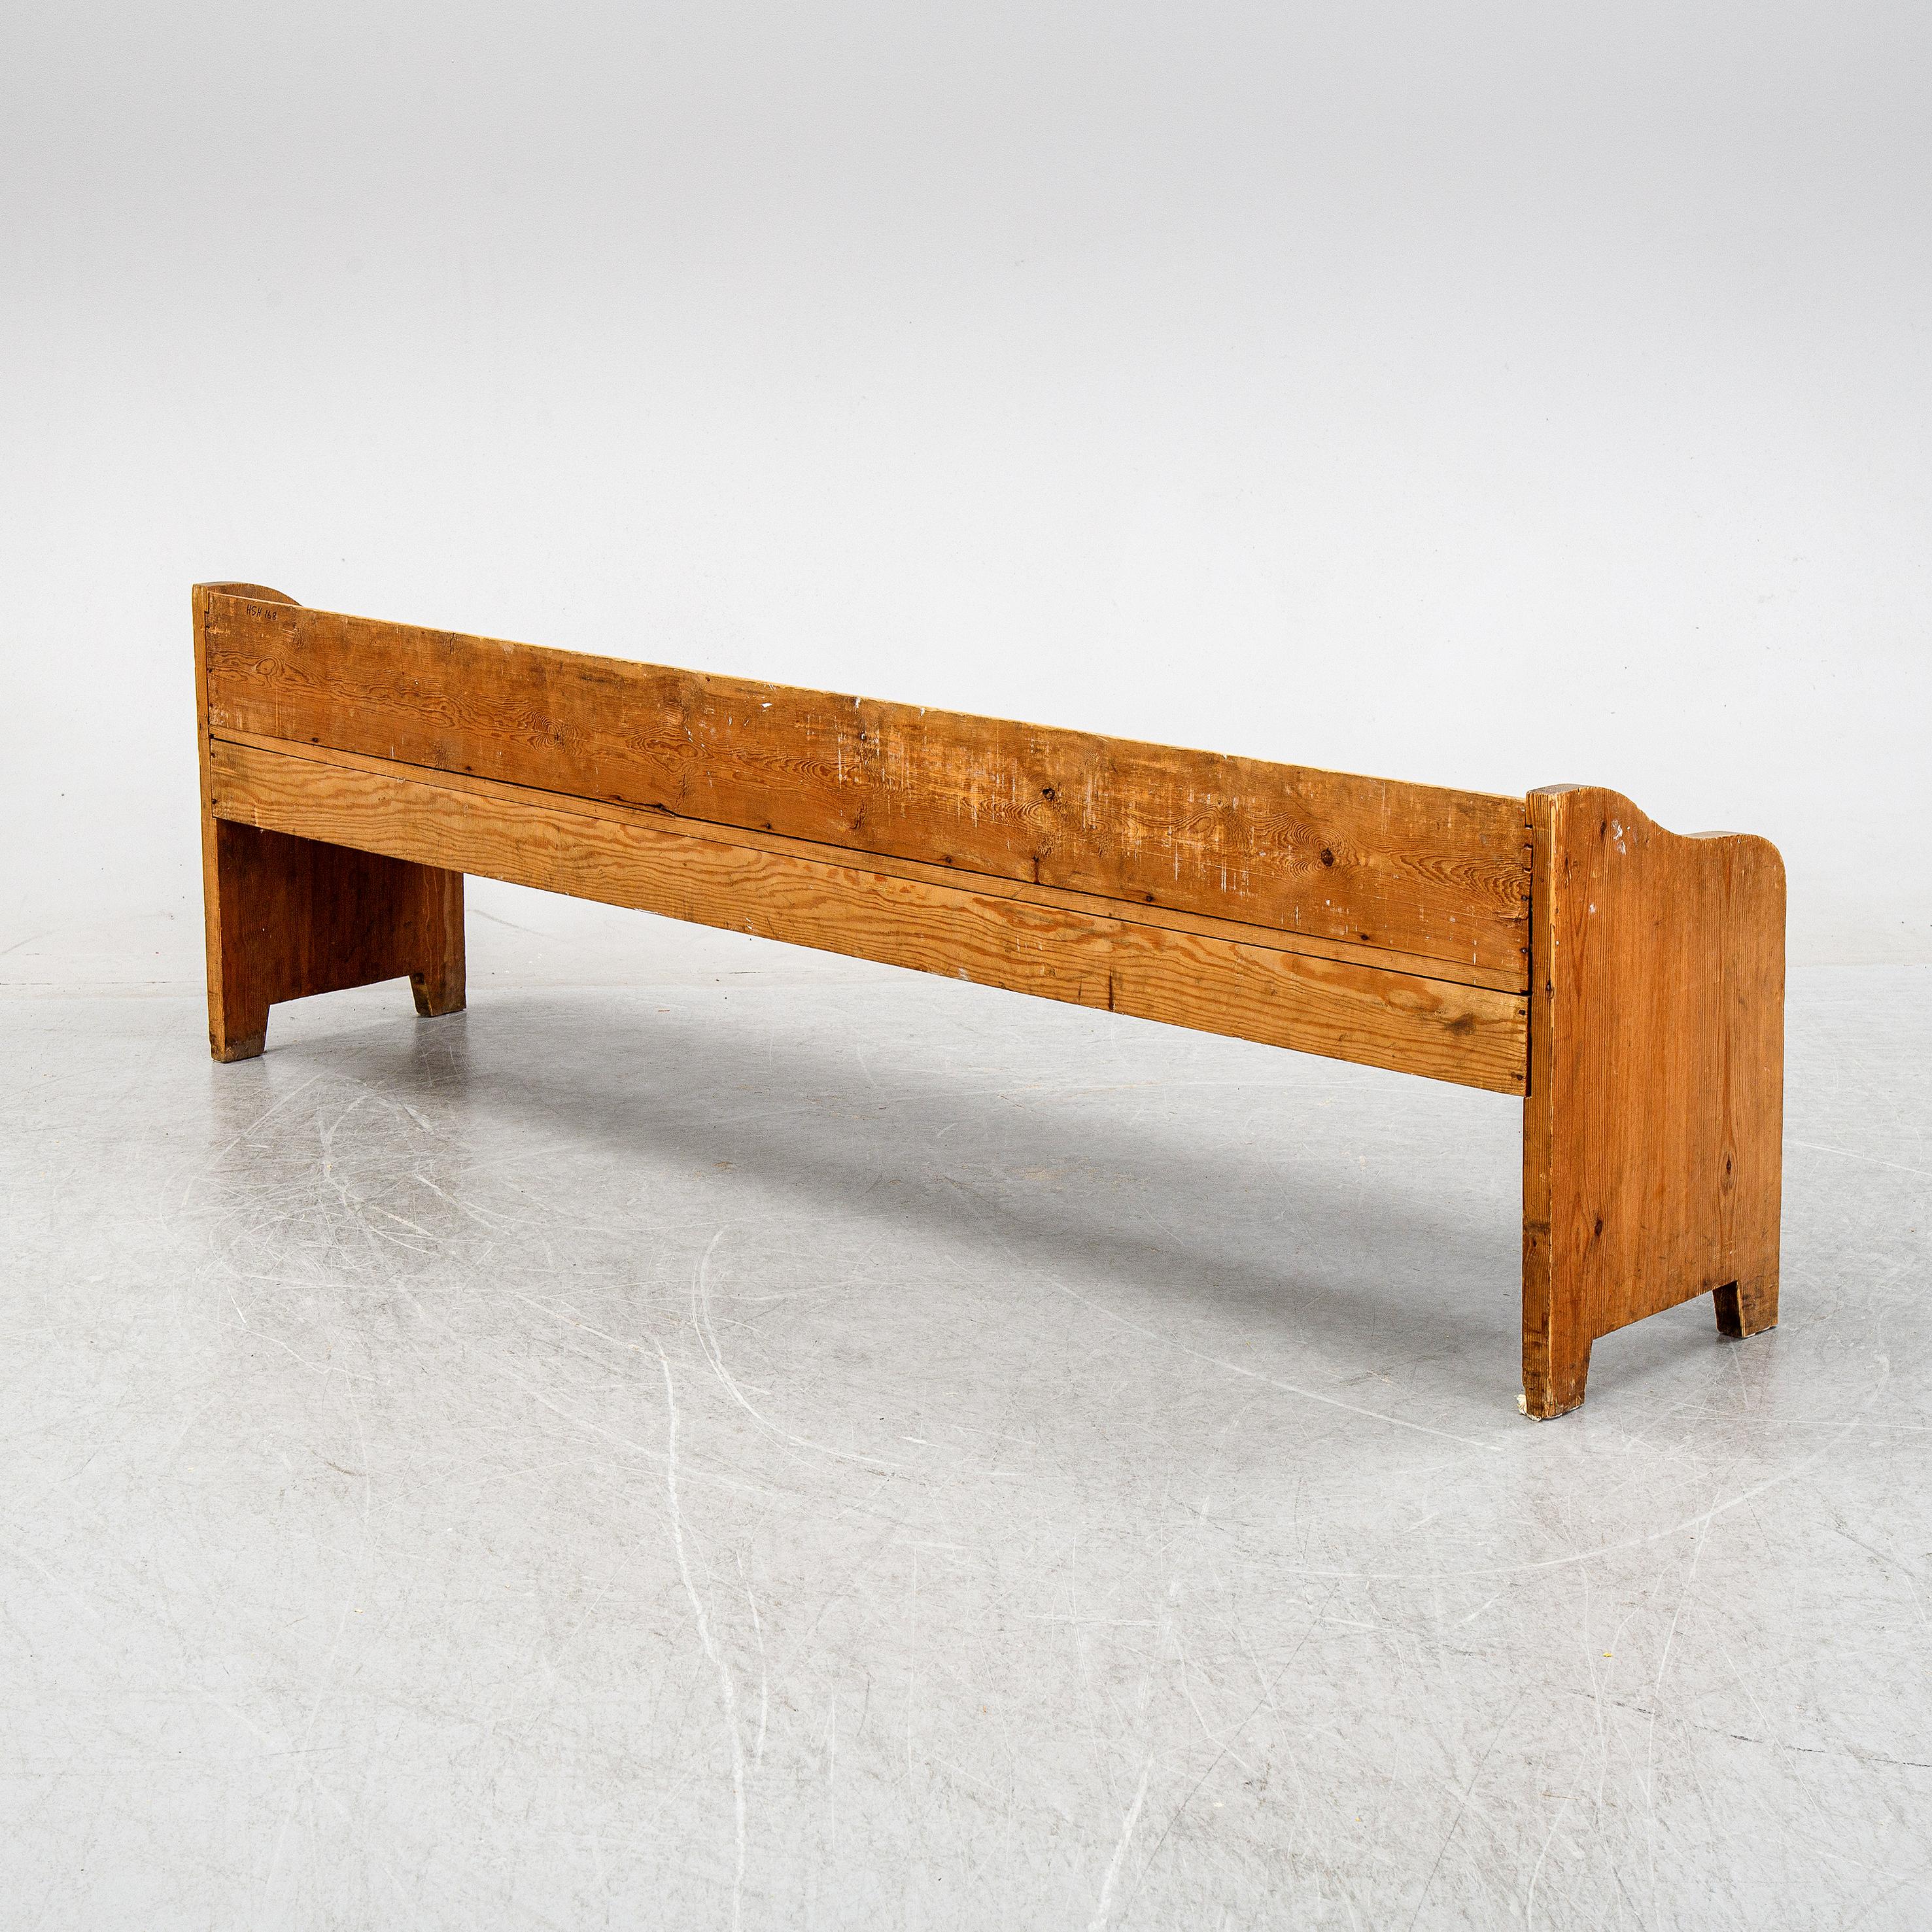 Wool Swedish Pine Sofa in style of Axel Einar Hjorth Produced in Sweden 1930s